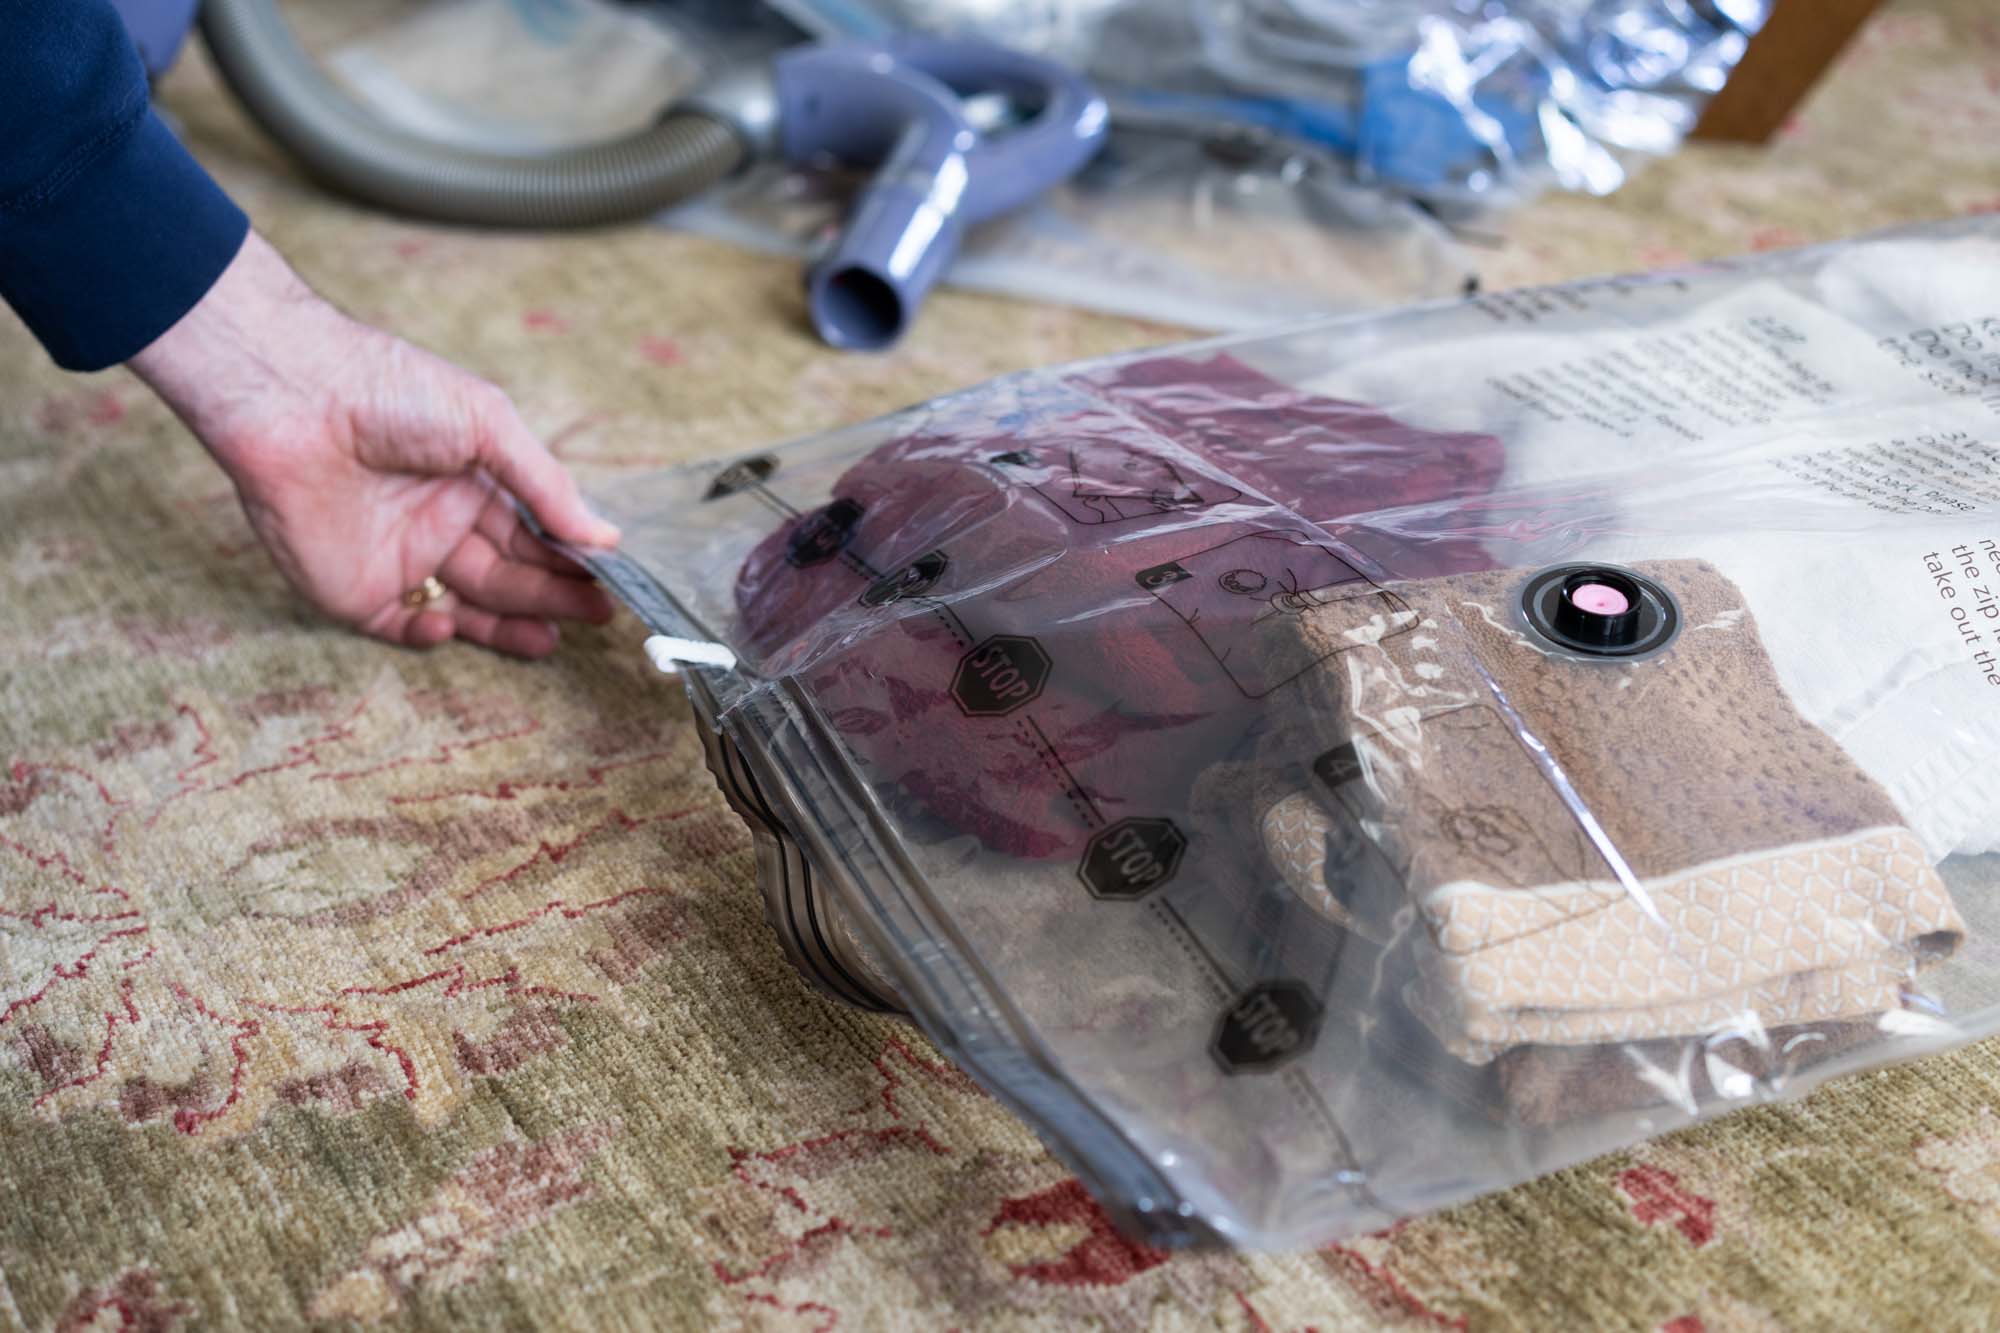 The Best Vacuum Sealer Bags of 2024 - Reviews by Your Best Digs